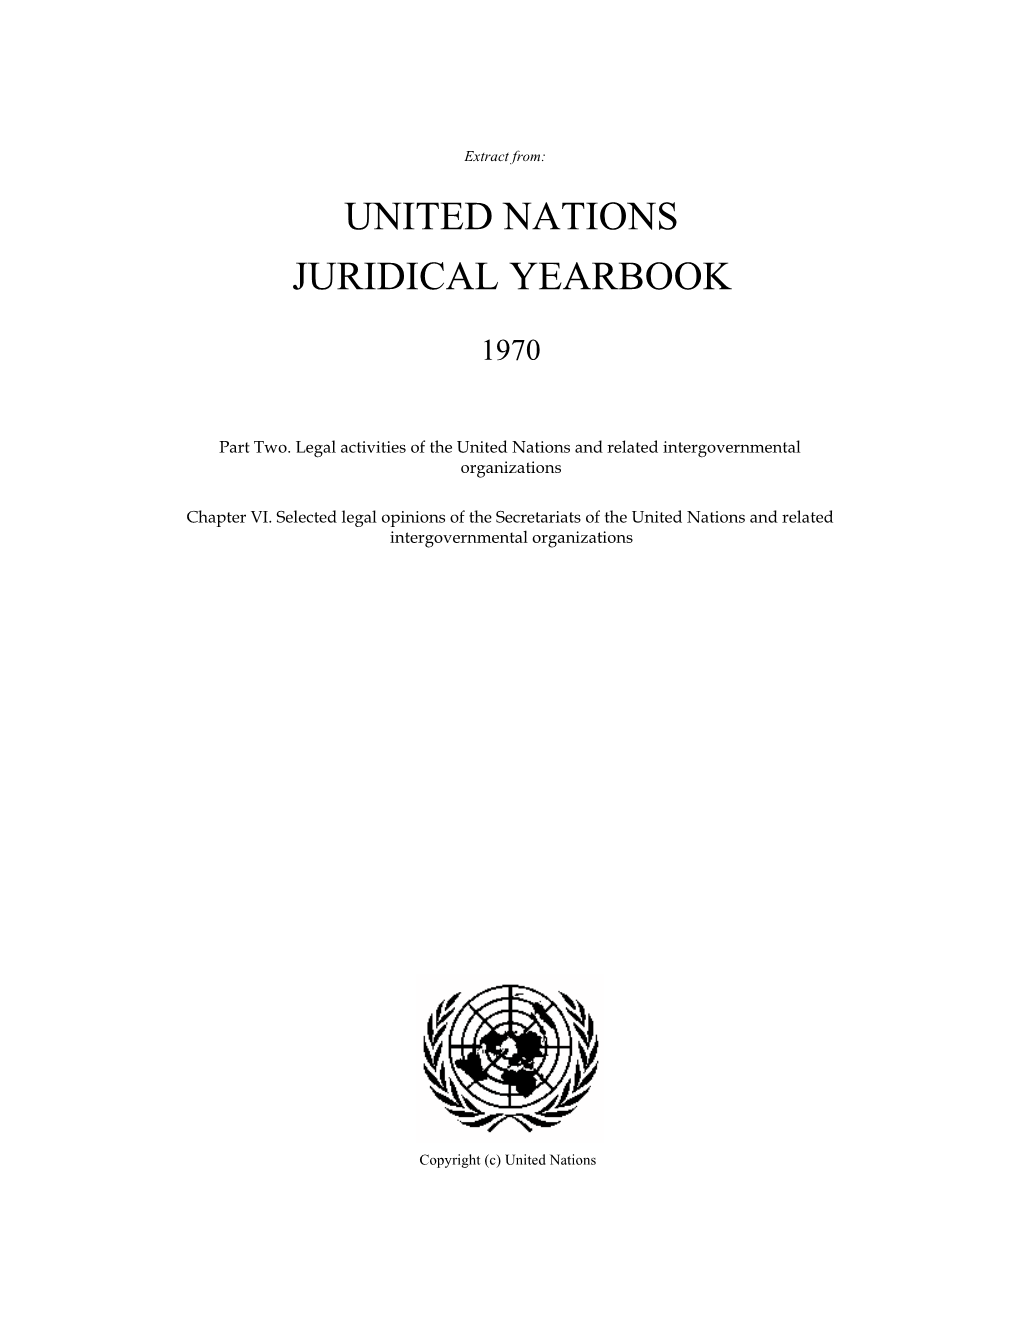 United Nations Juridical Yearbook, 1970